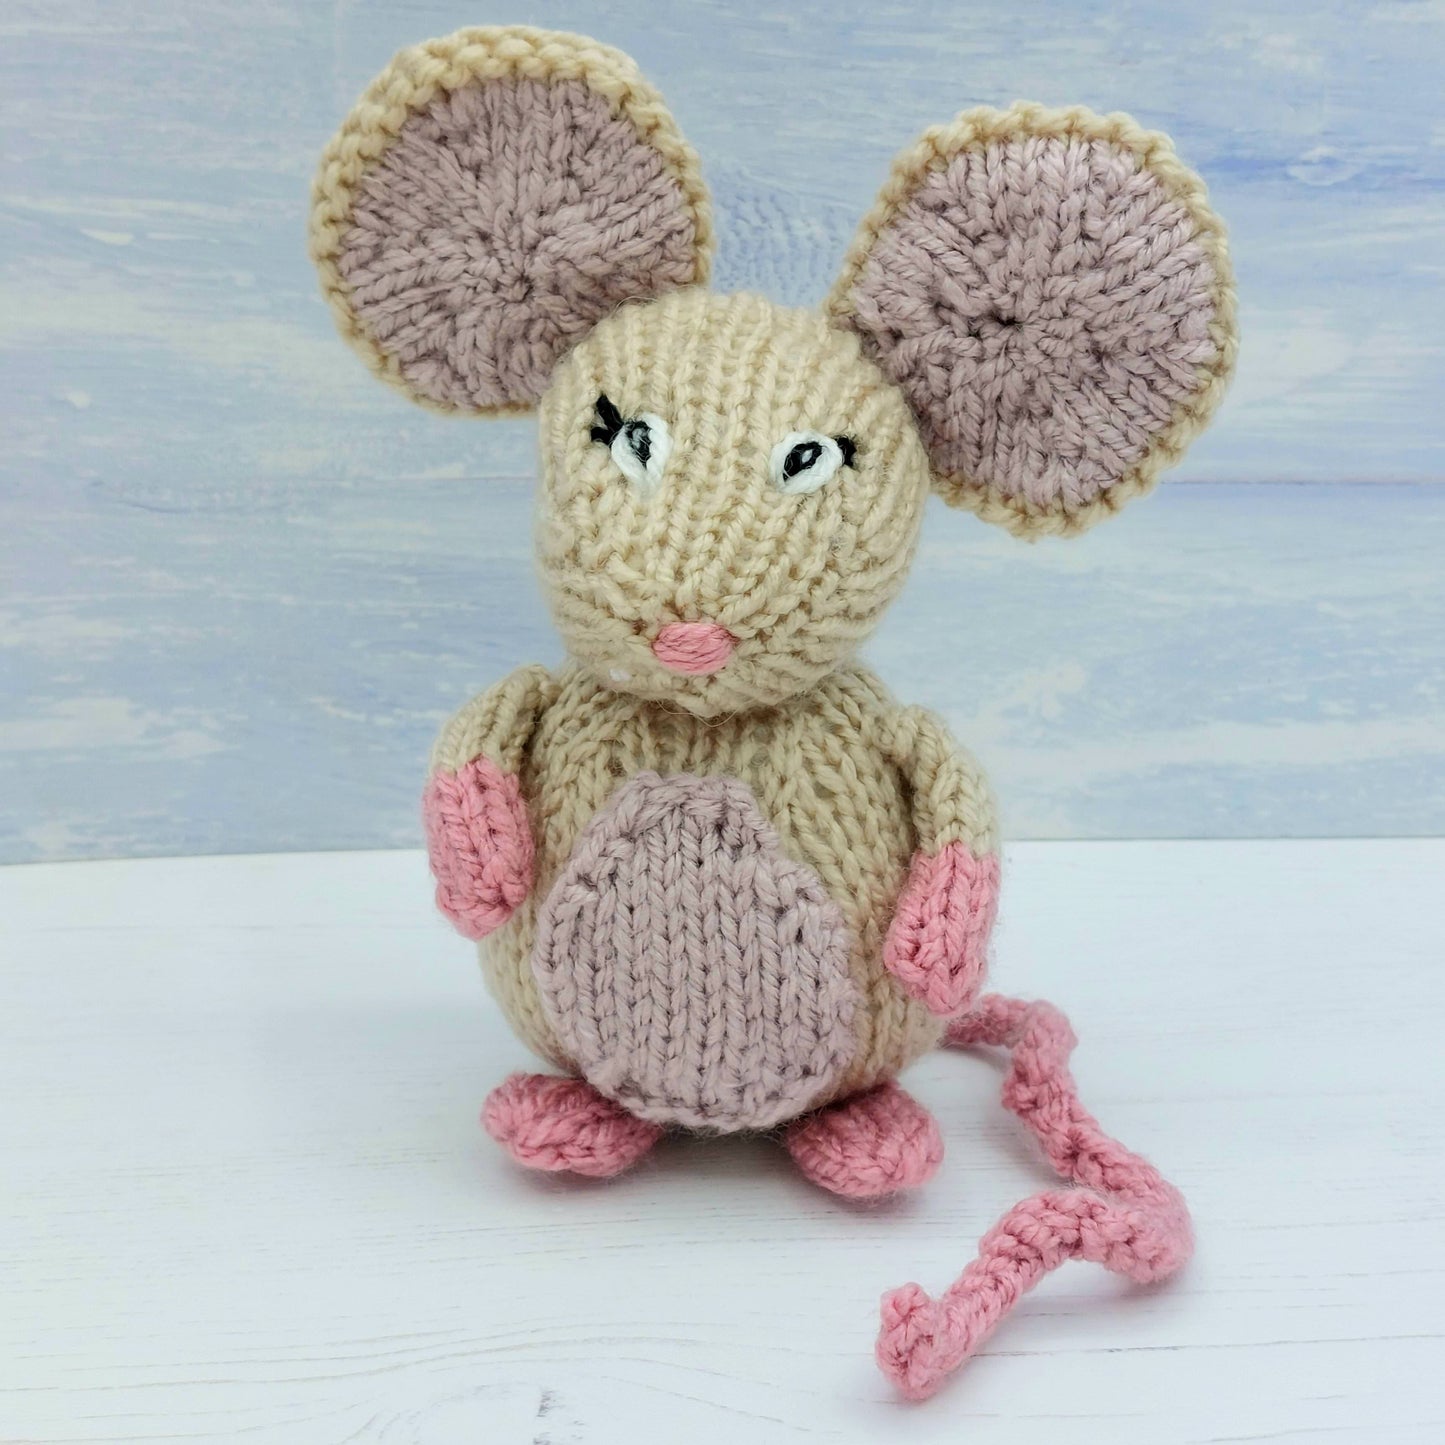 Mabel the Mouse Book and Knitting Kit Bundles Pre-order